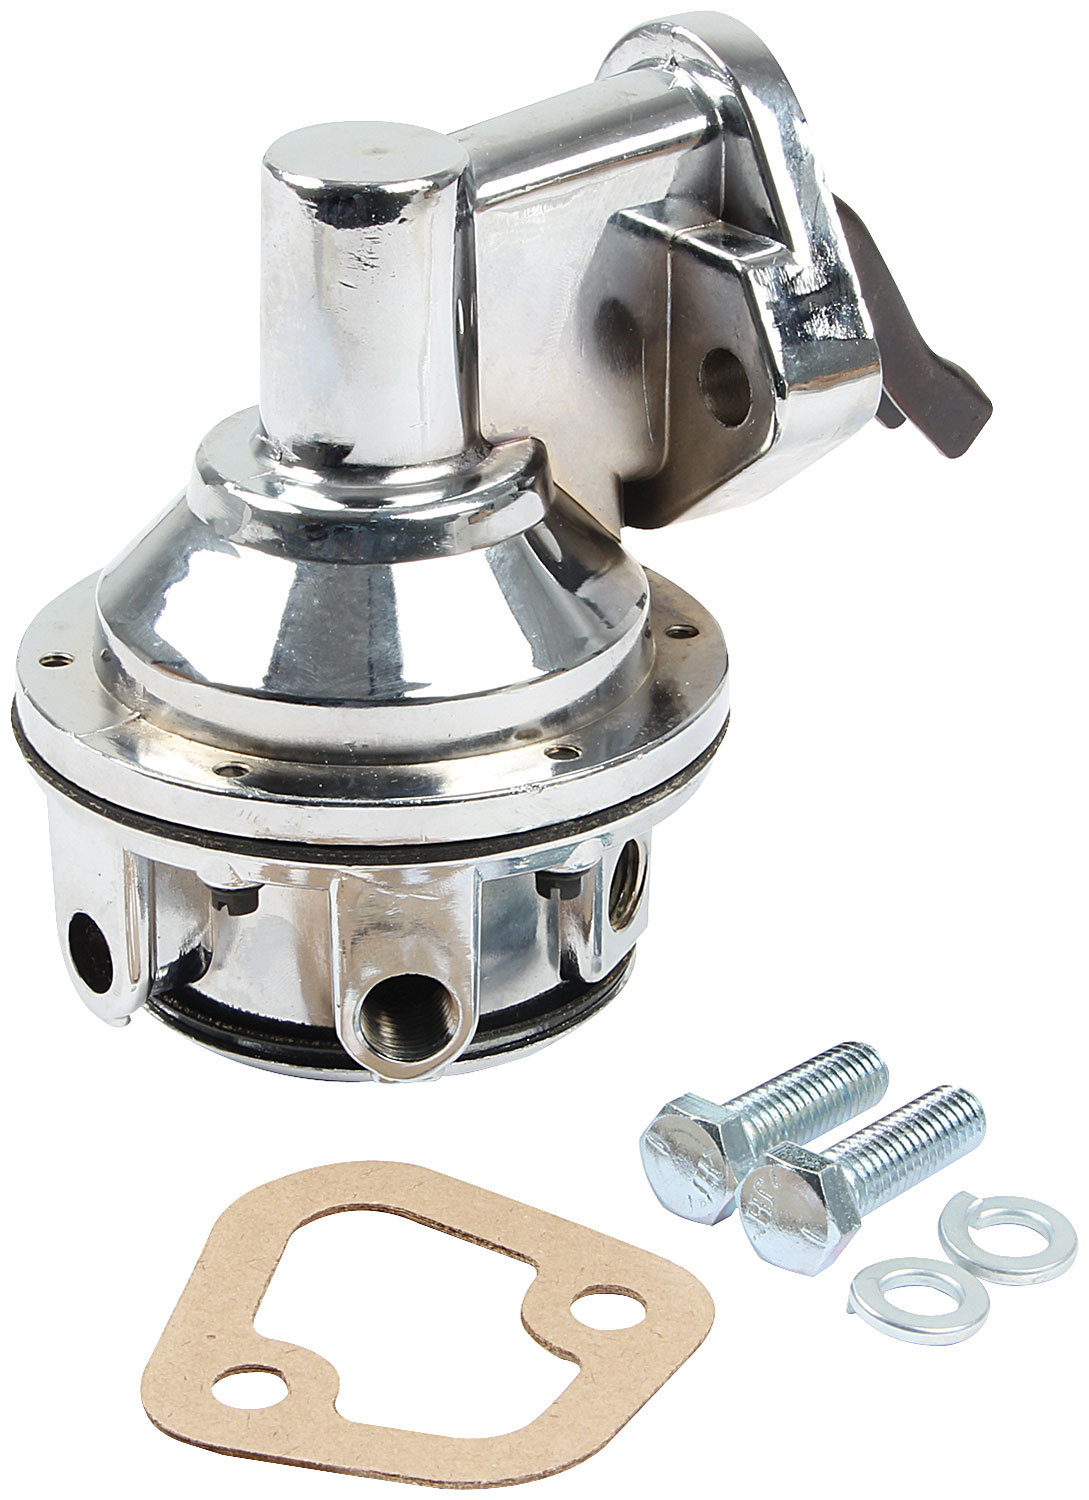 Fuel Pump - Mechanical - 80 gph - 6.5-8 psi - 1/4 in NPT Female Inlet / Outlet - Aluminum - Polished - Gas - Big Block Chevy - Each